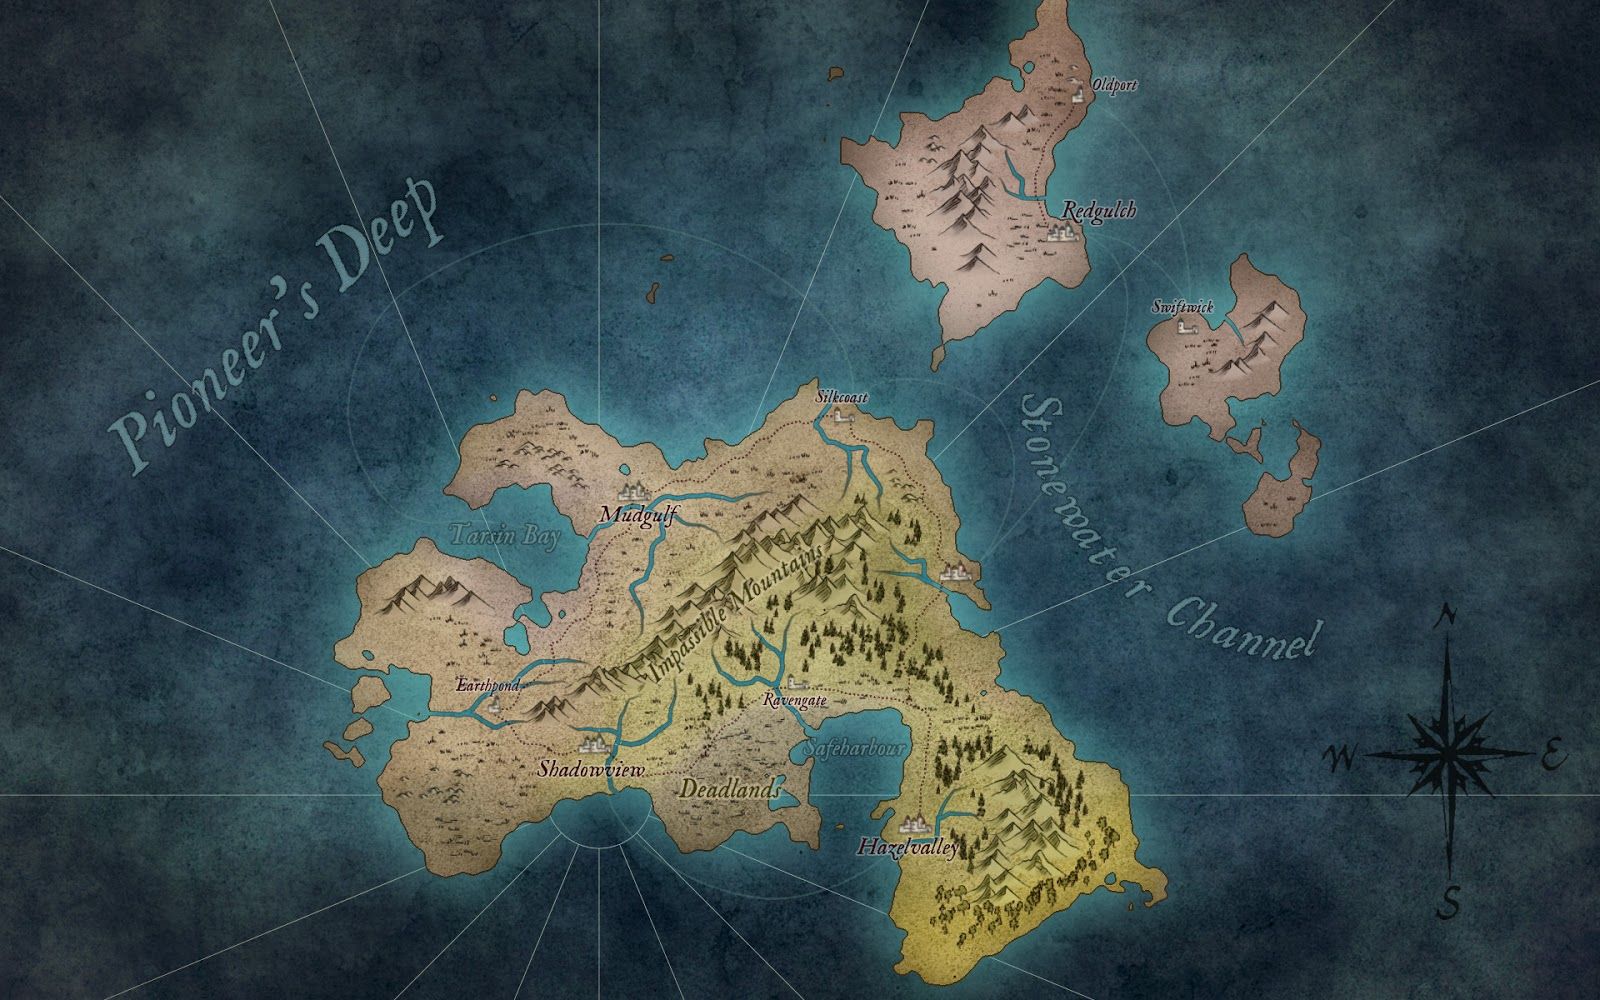 Campaign map by /uSamwiseWrites on the wonderdraft subreddit.